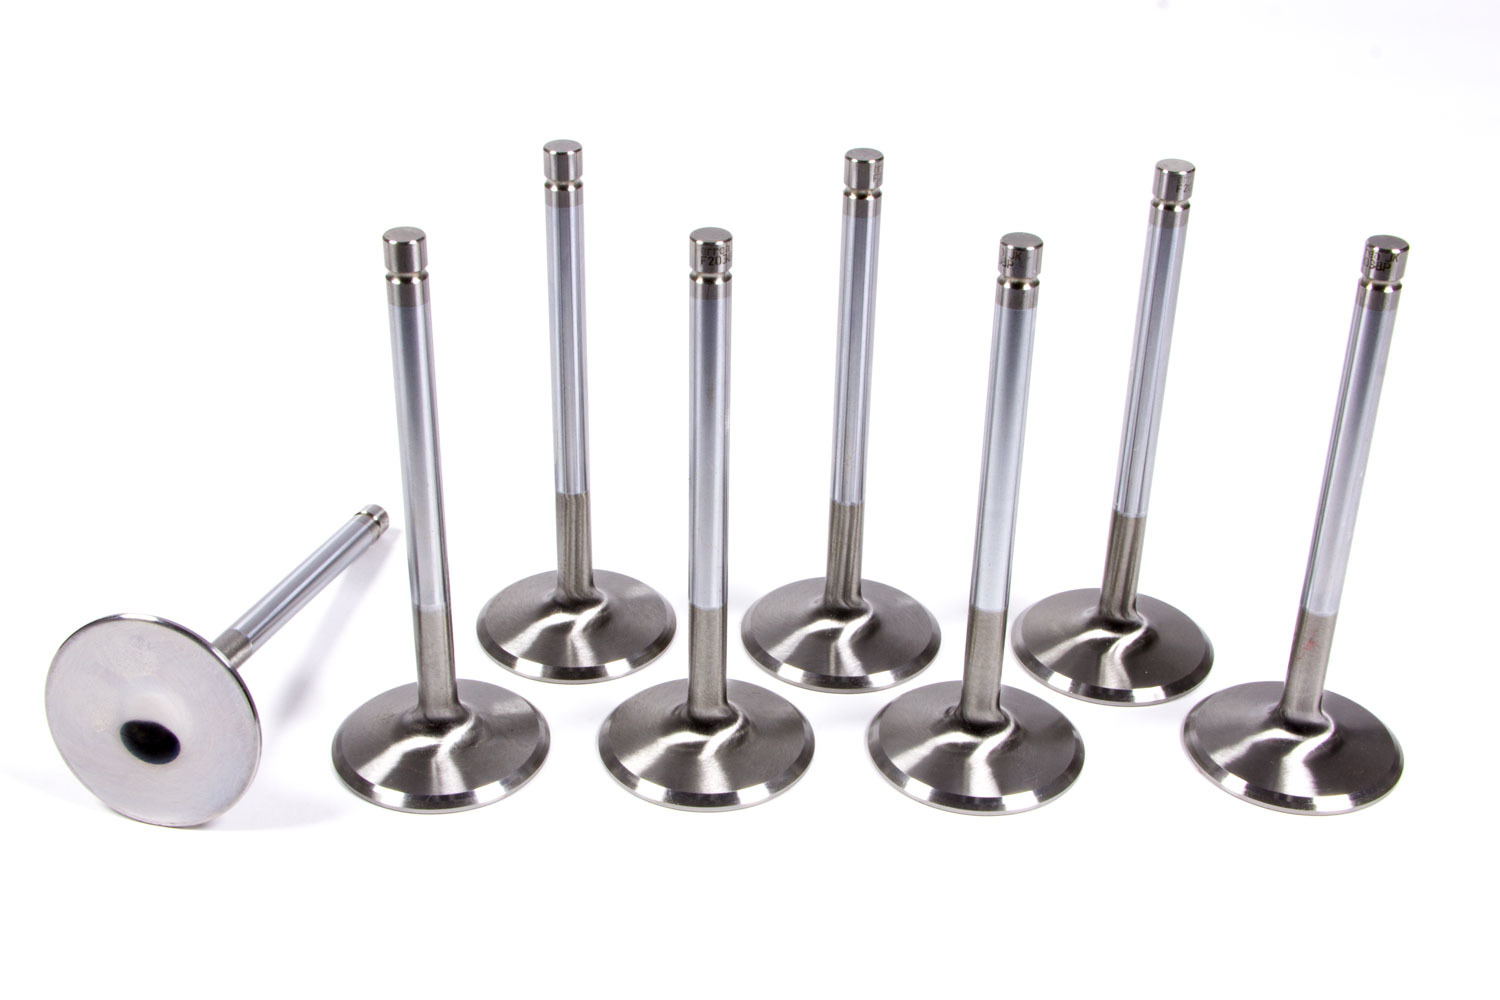 Ferrea Racing Components (F1062P-8) 2.190" Hollow Stem Intake Valve for Big Block Chevy